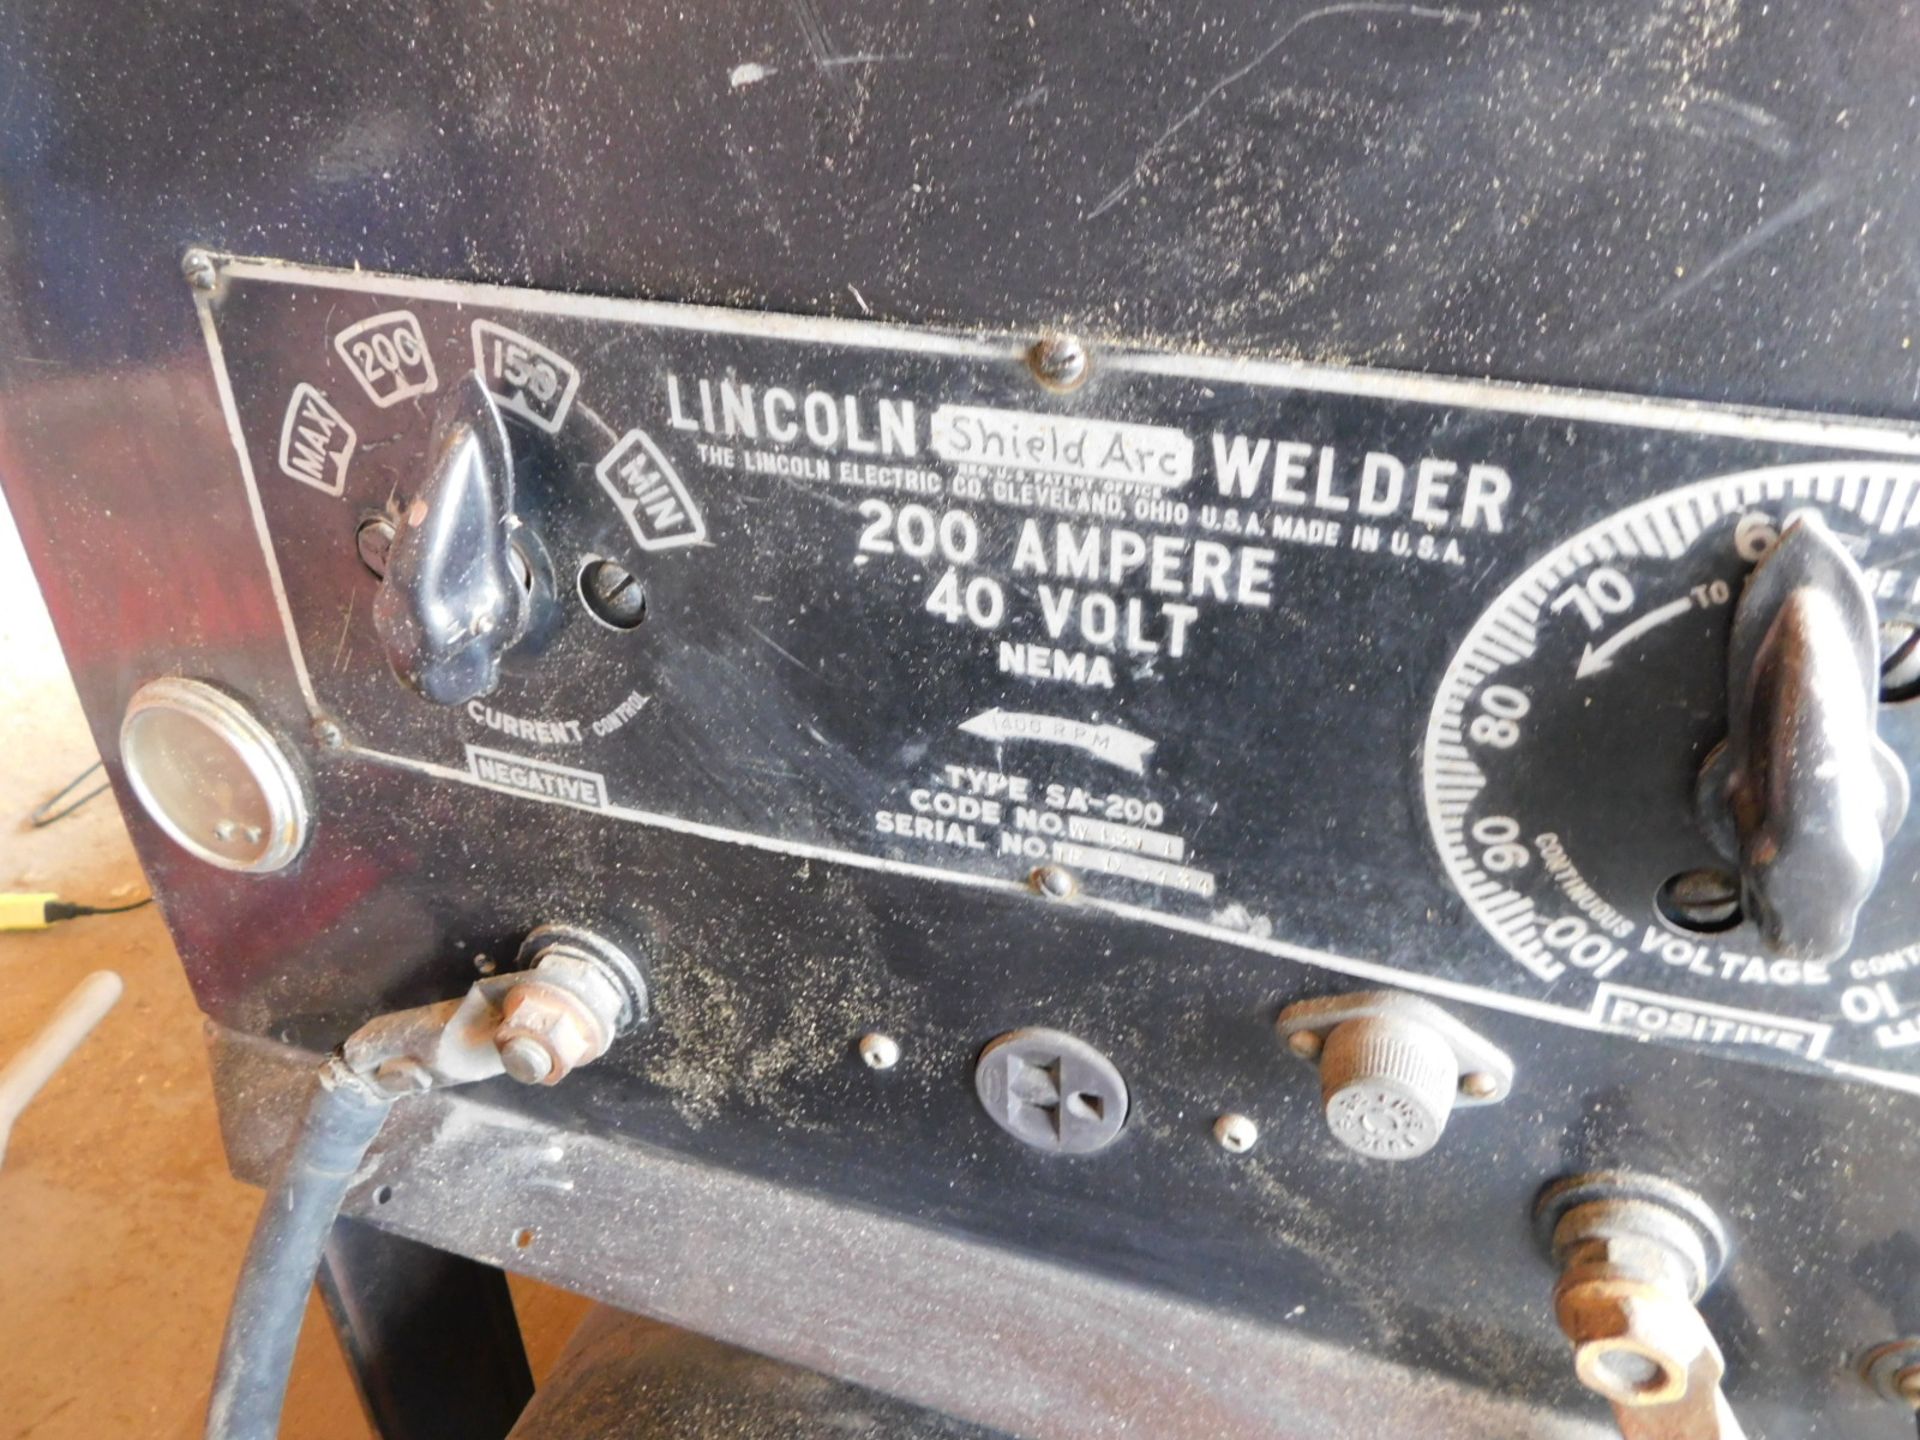 LINCOLN 200AMP SHIELD ARC WELDER TYPE SA-200, SKID MOUNTED, CABLES - Image 3 of 6